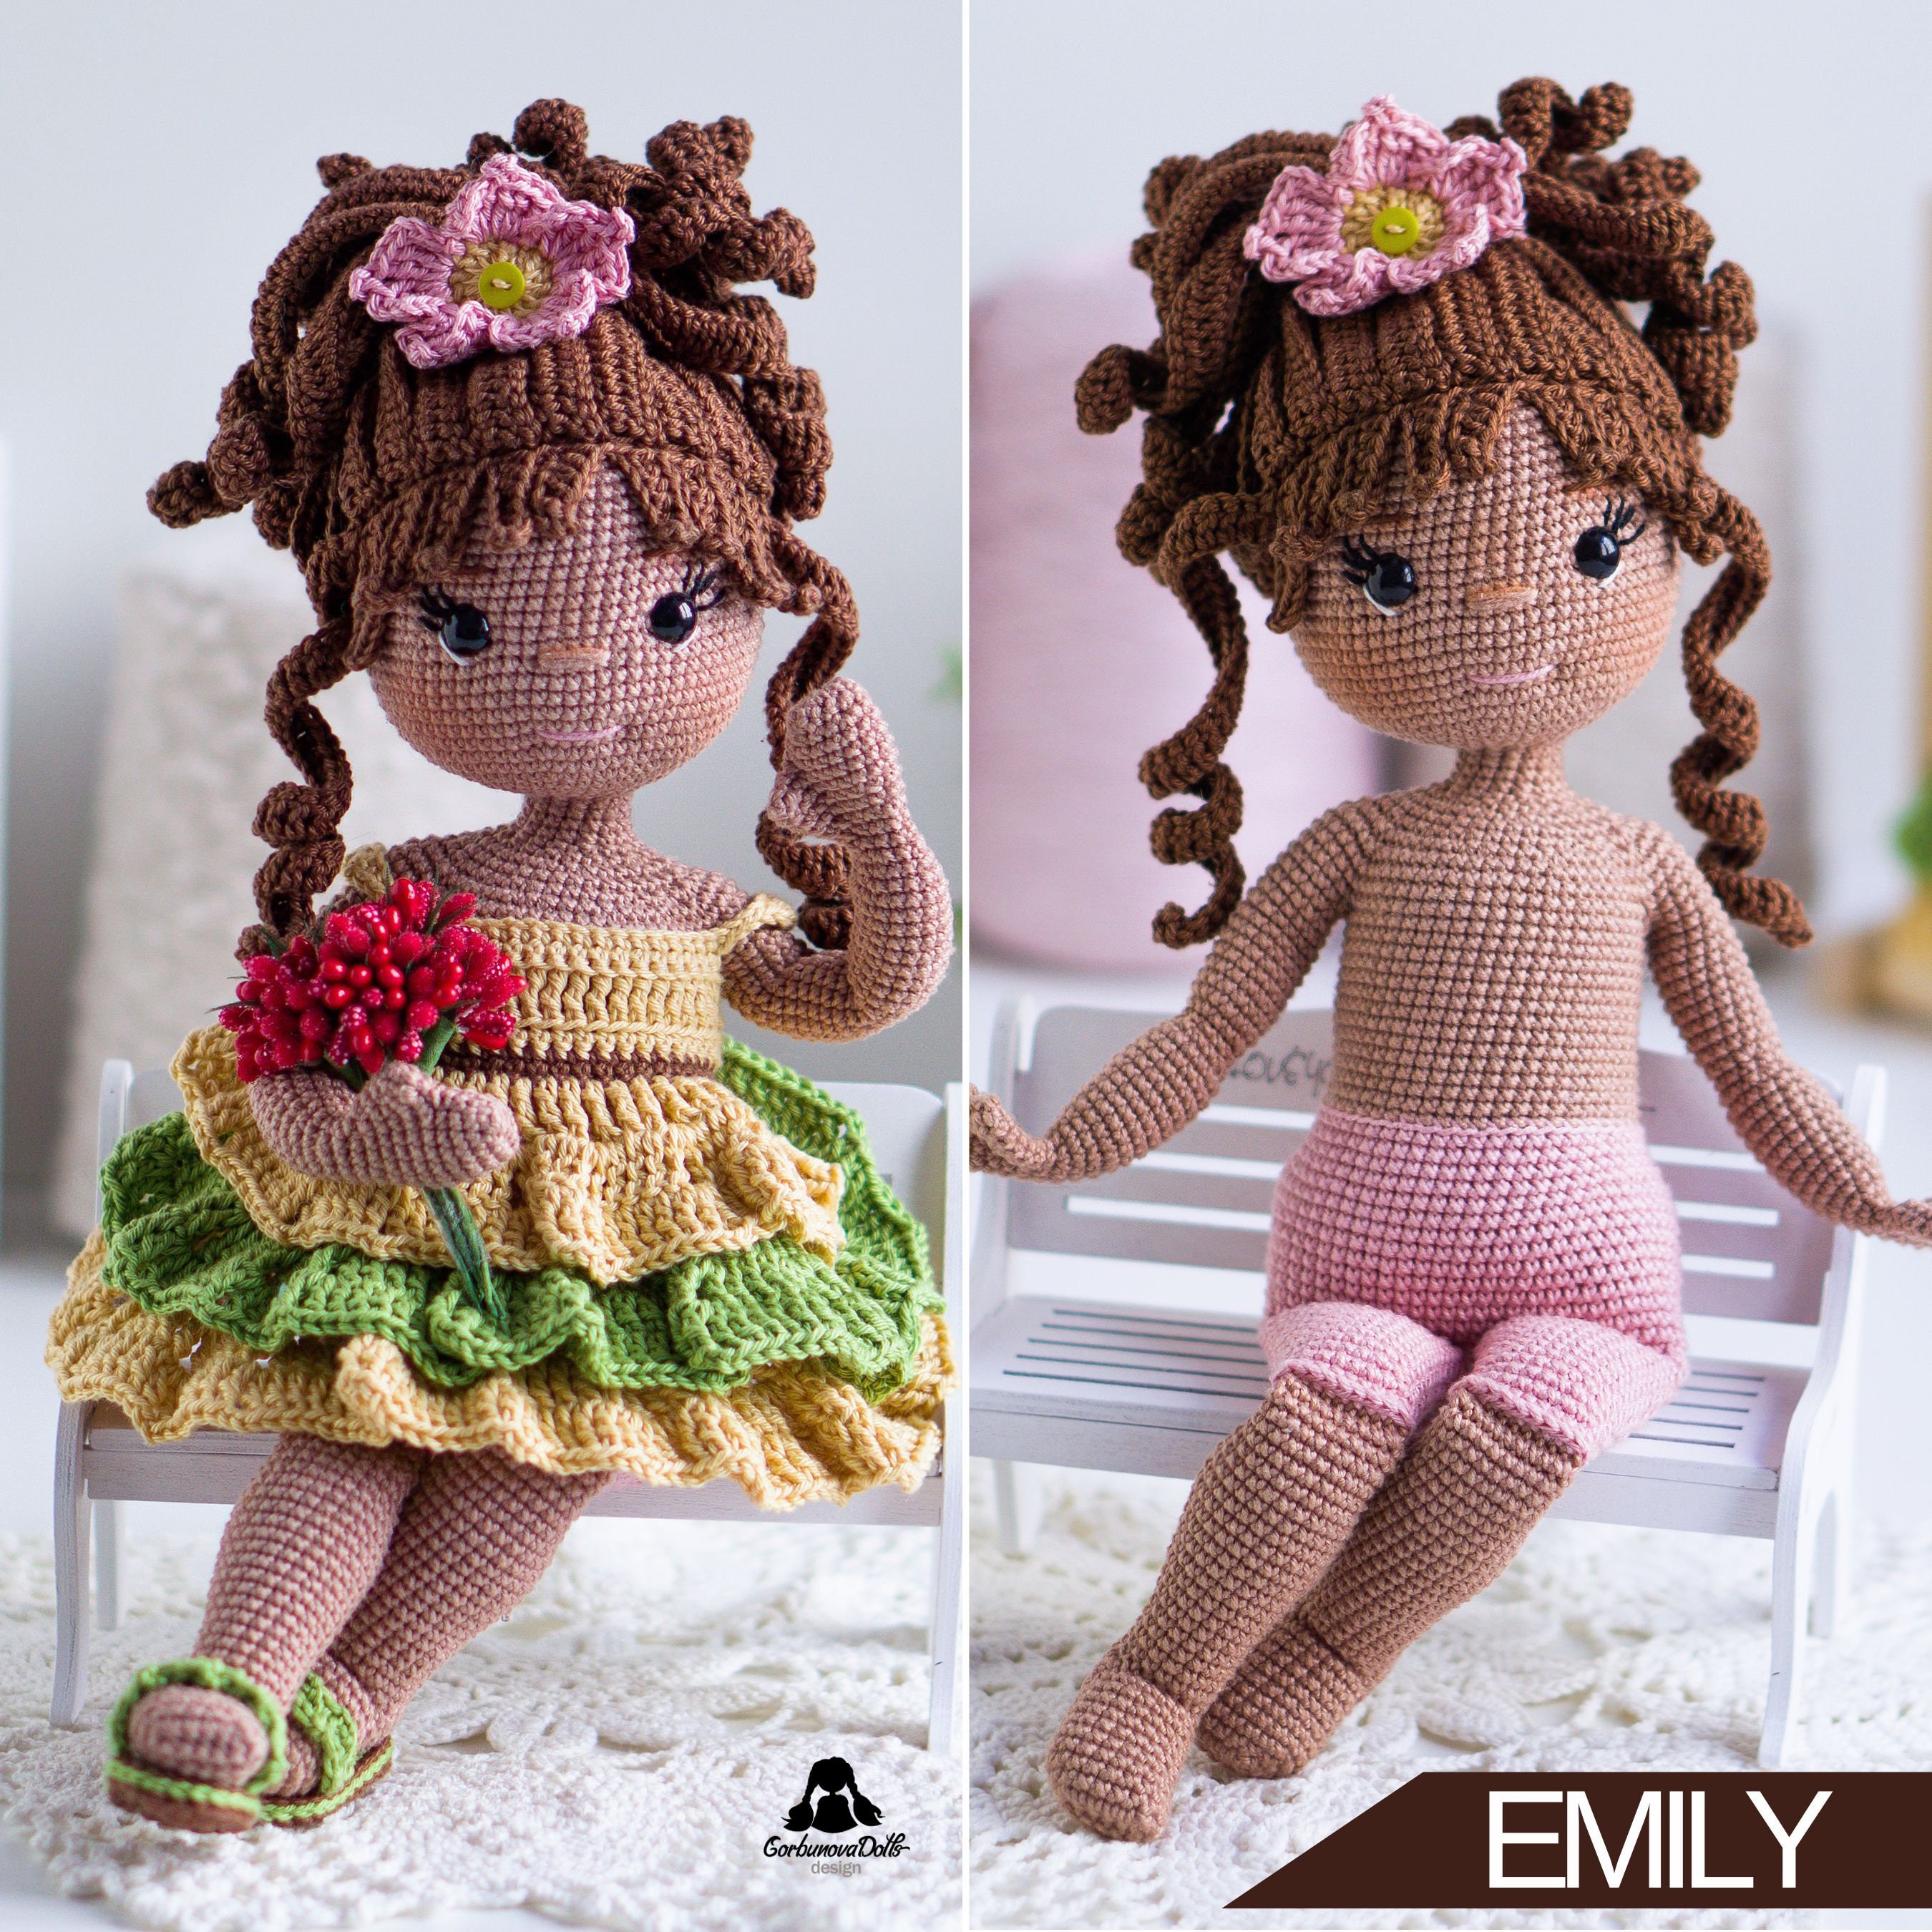 20 Free Patterns For Fashion Doll Clothes • Oombawka Design Crochet